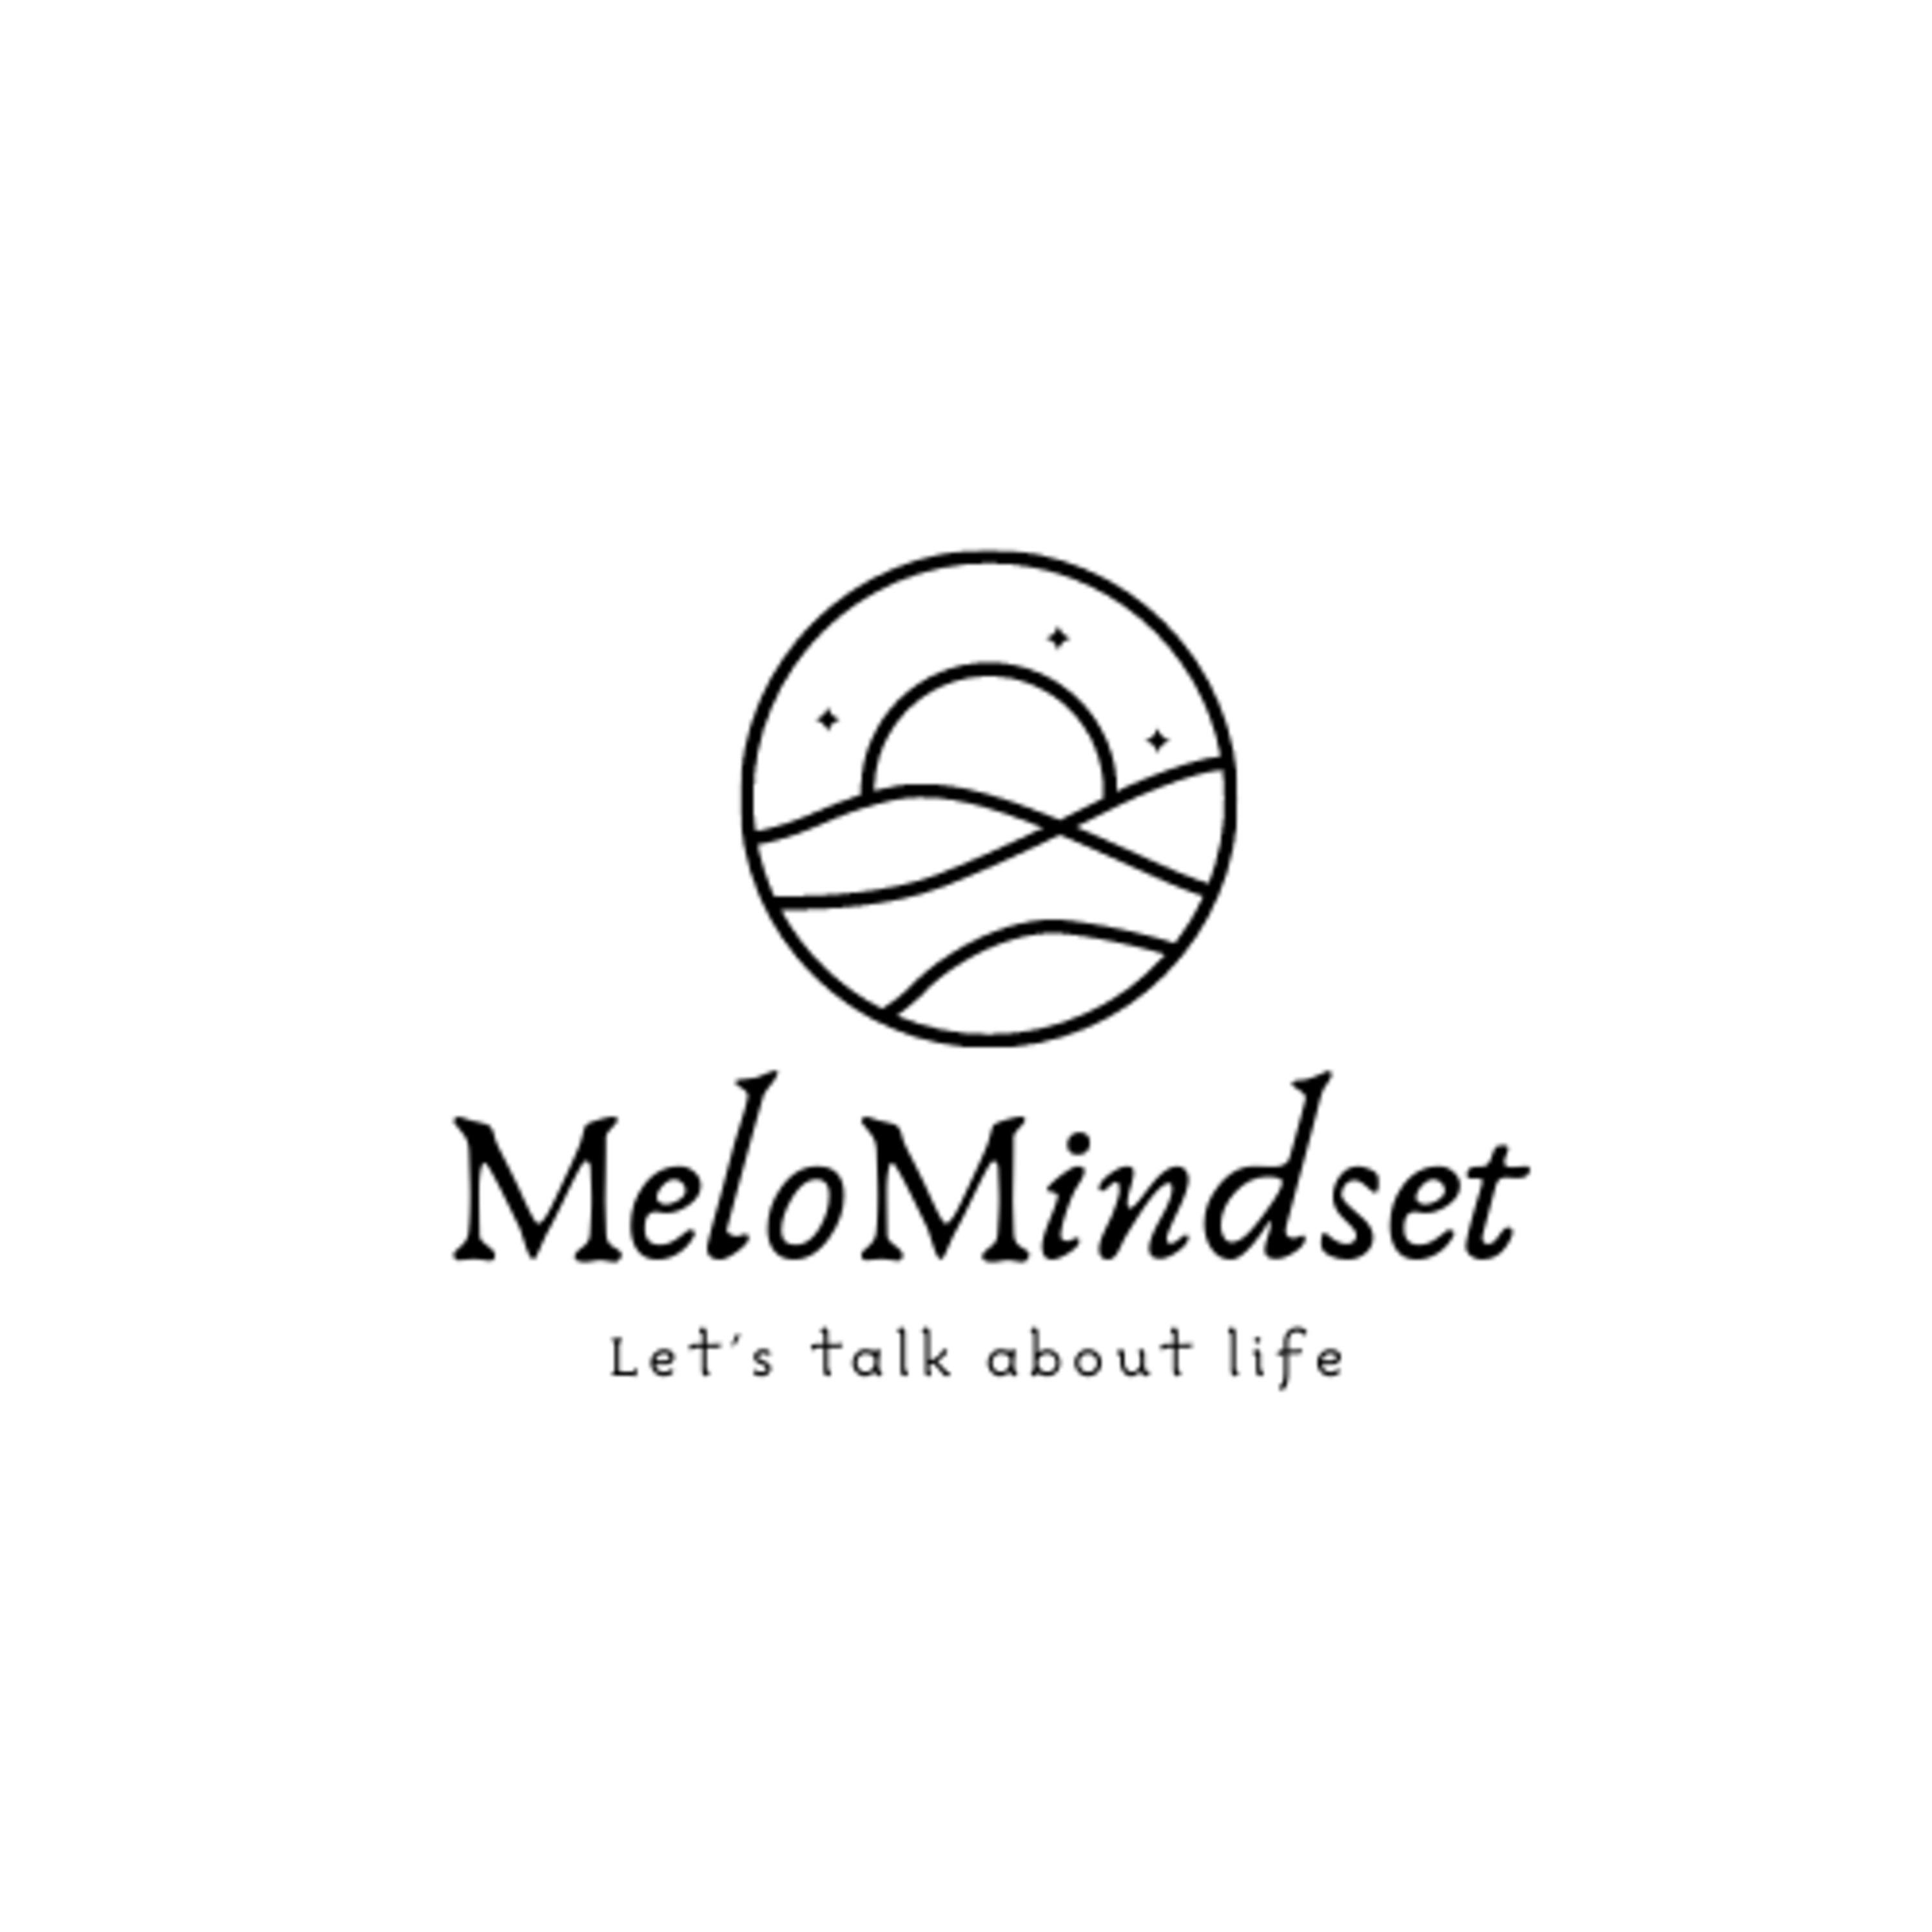 Self Care & Mental Health By MeloMindset